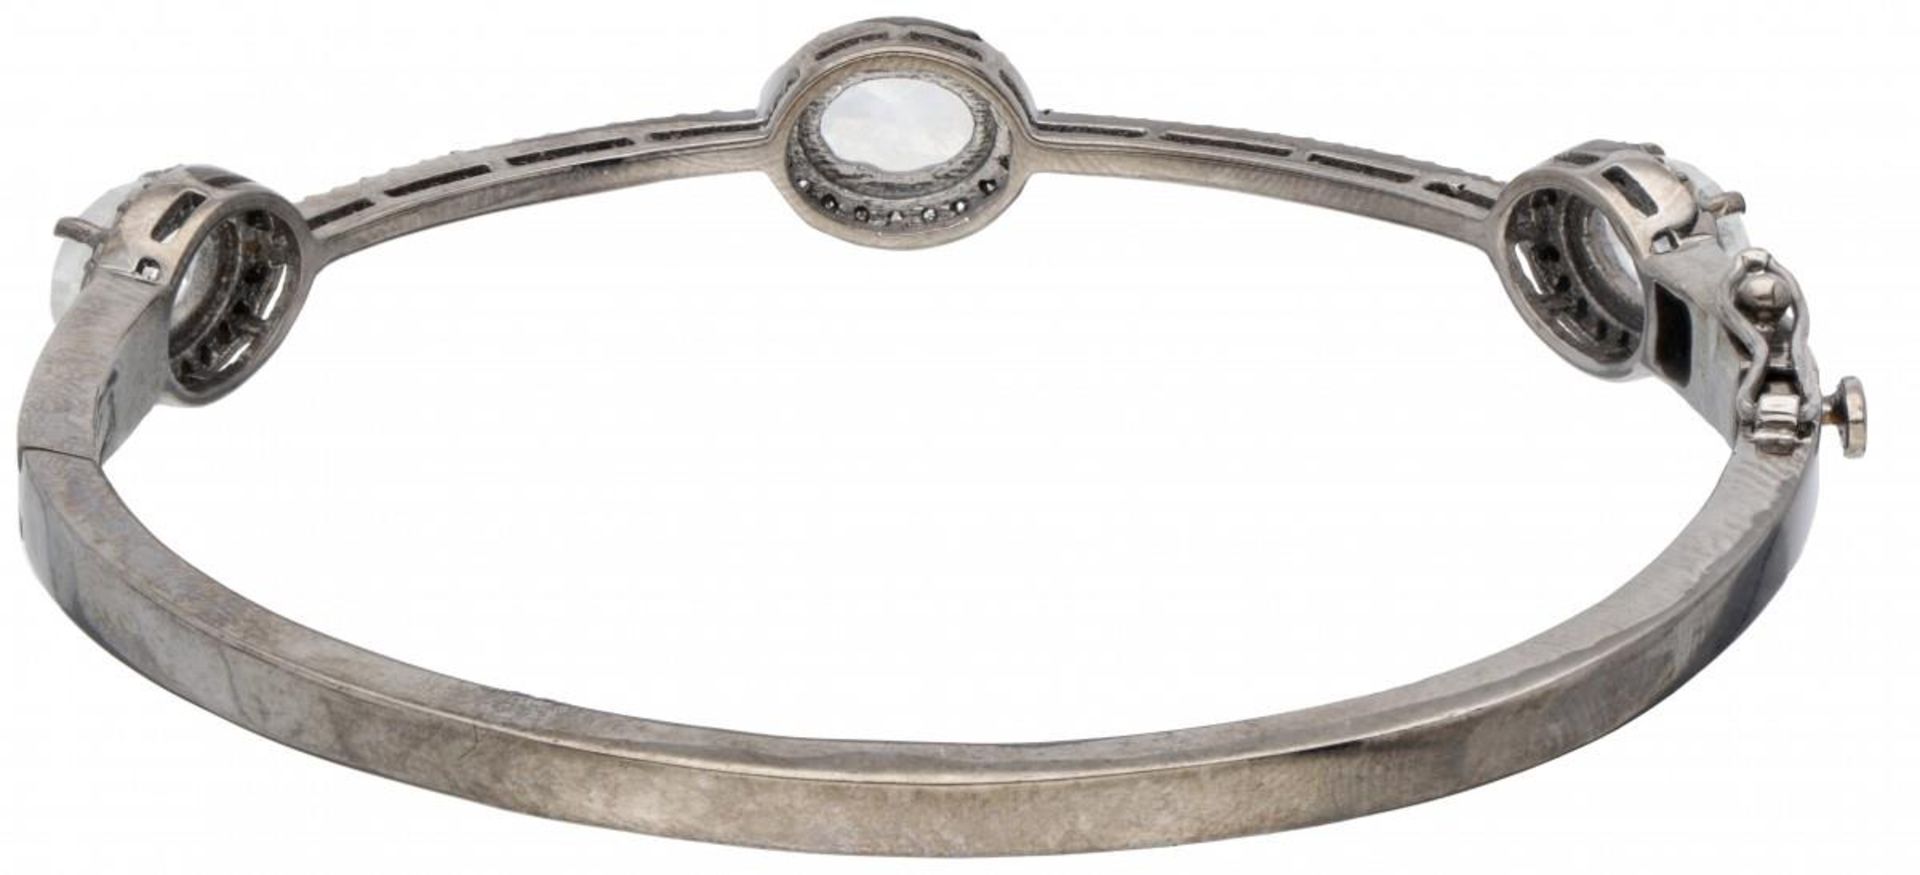 Silver bangle bracelet set with approx. 2.94 ct. moonstone and rose cut diamond - 925/1000. - Image 2 of 2